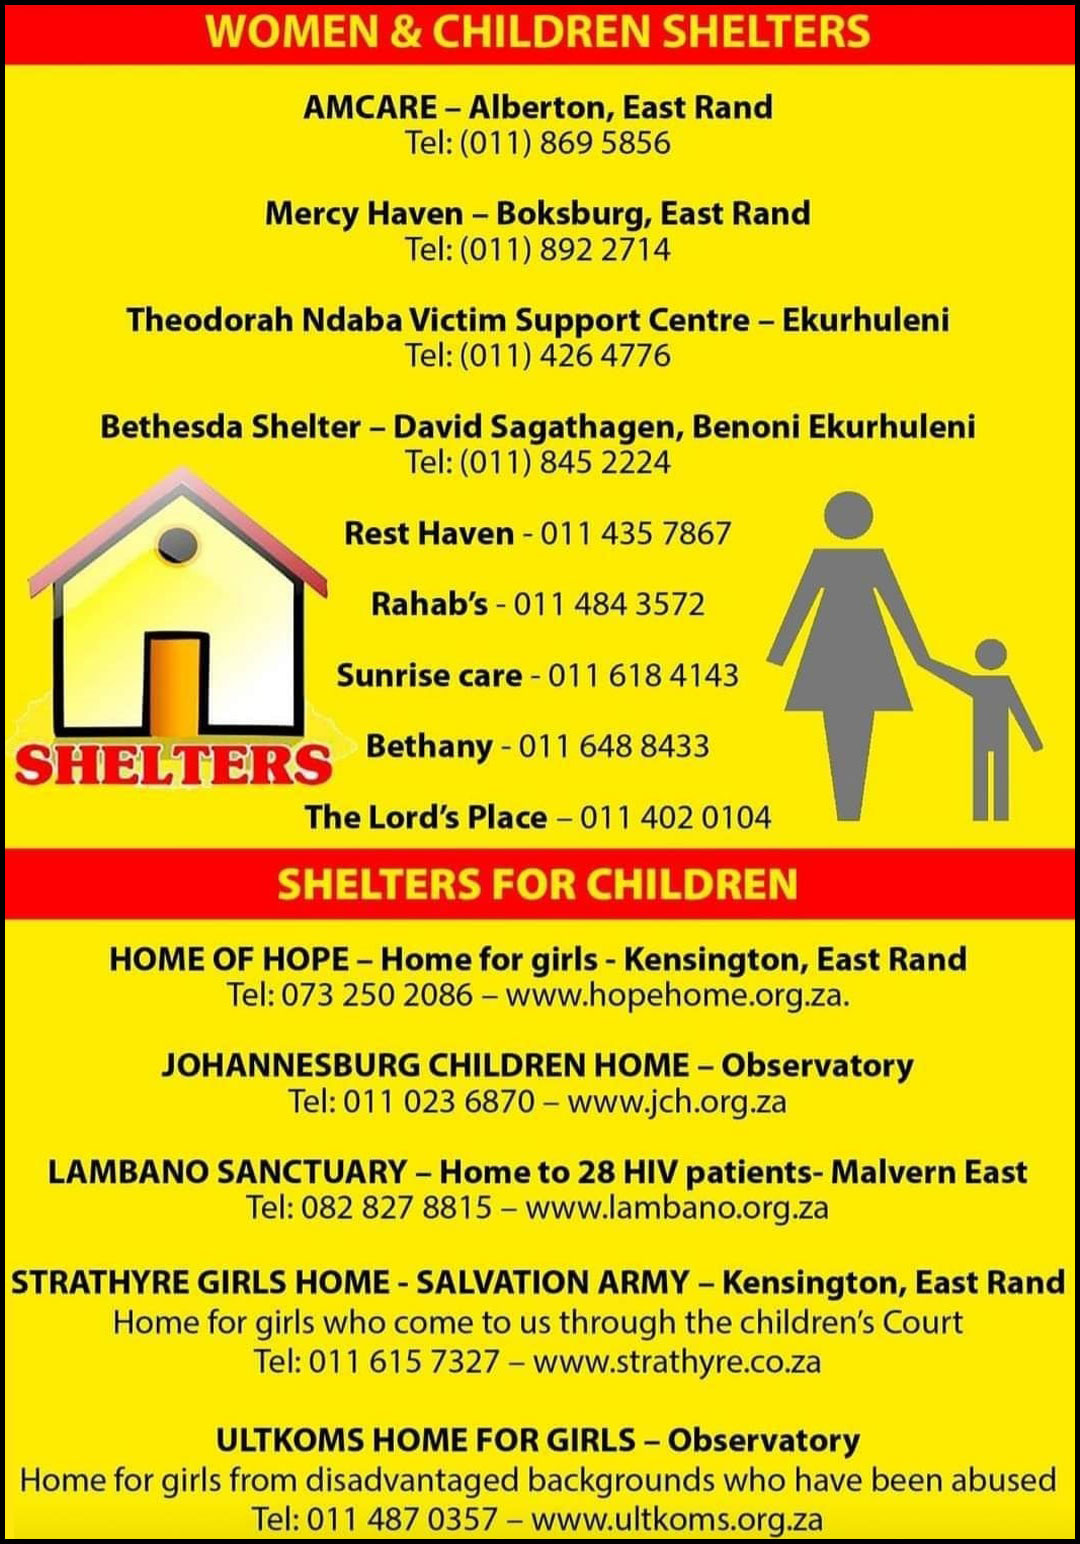 Shelters can be contacted